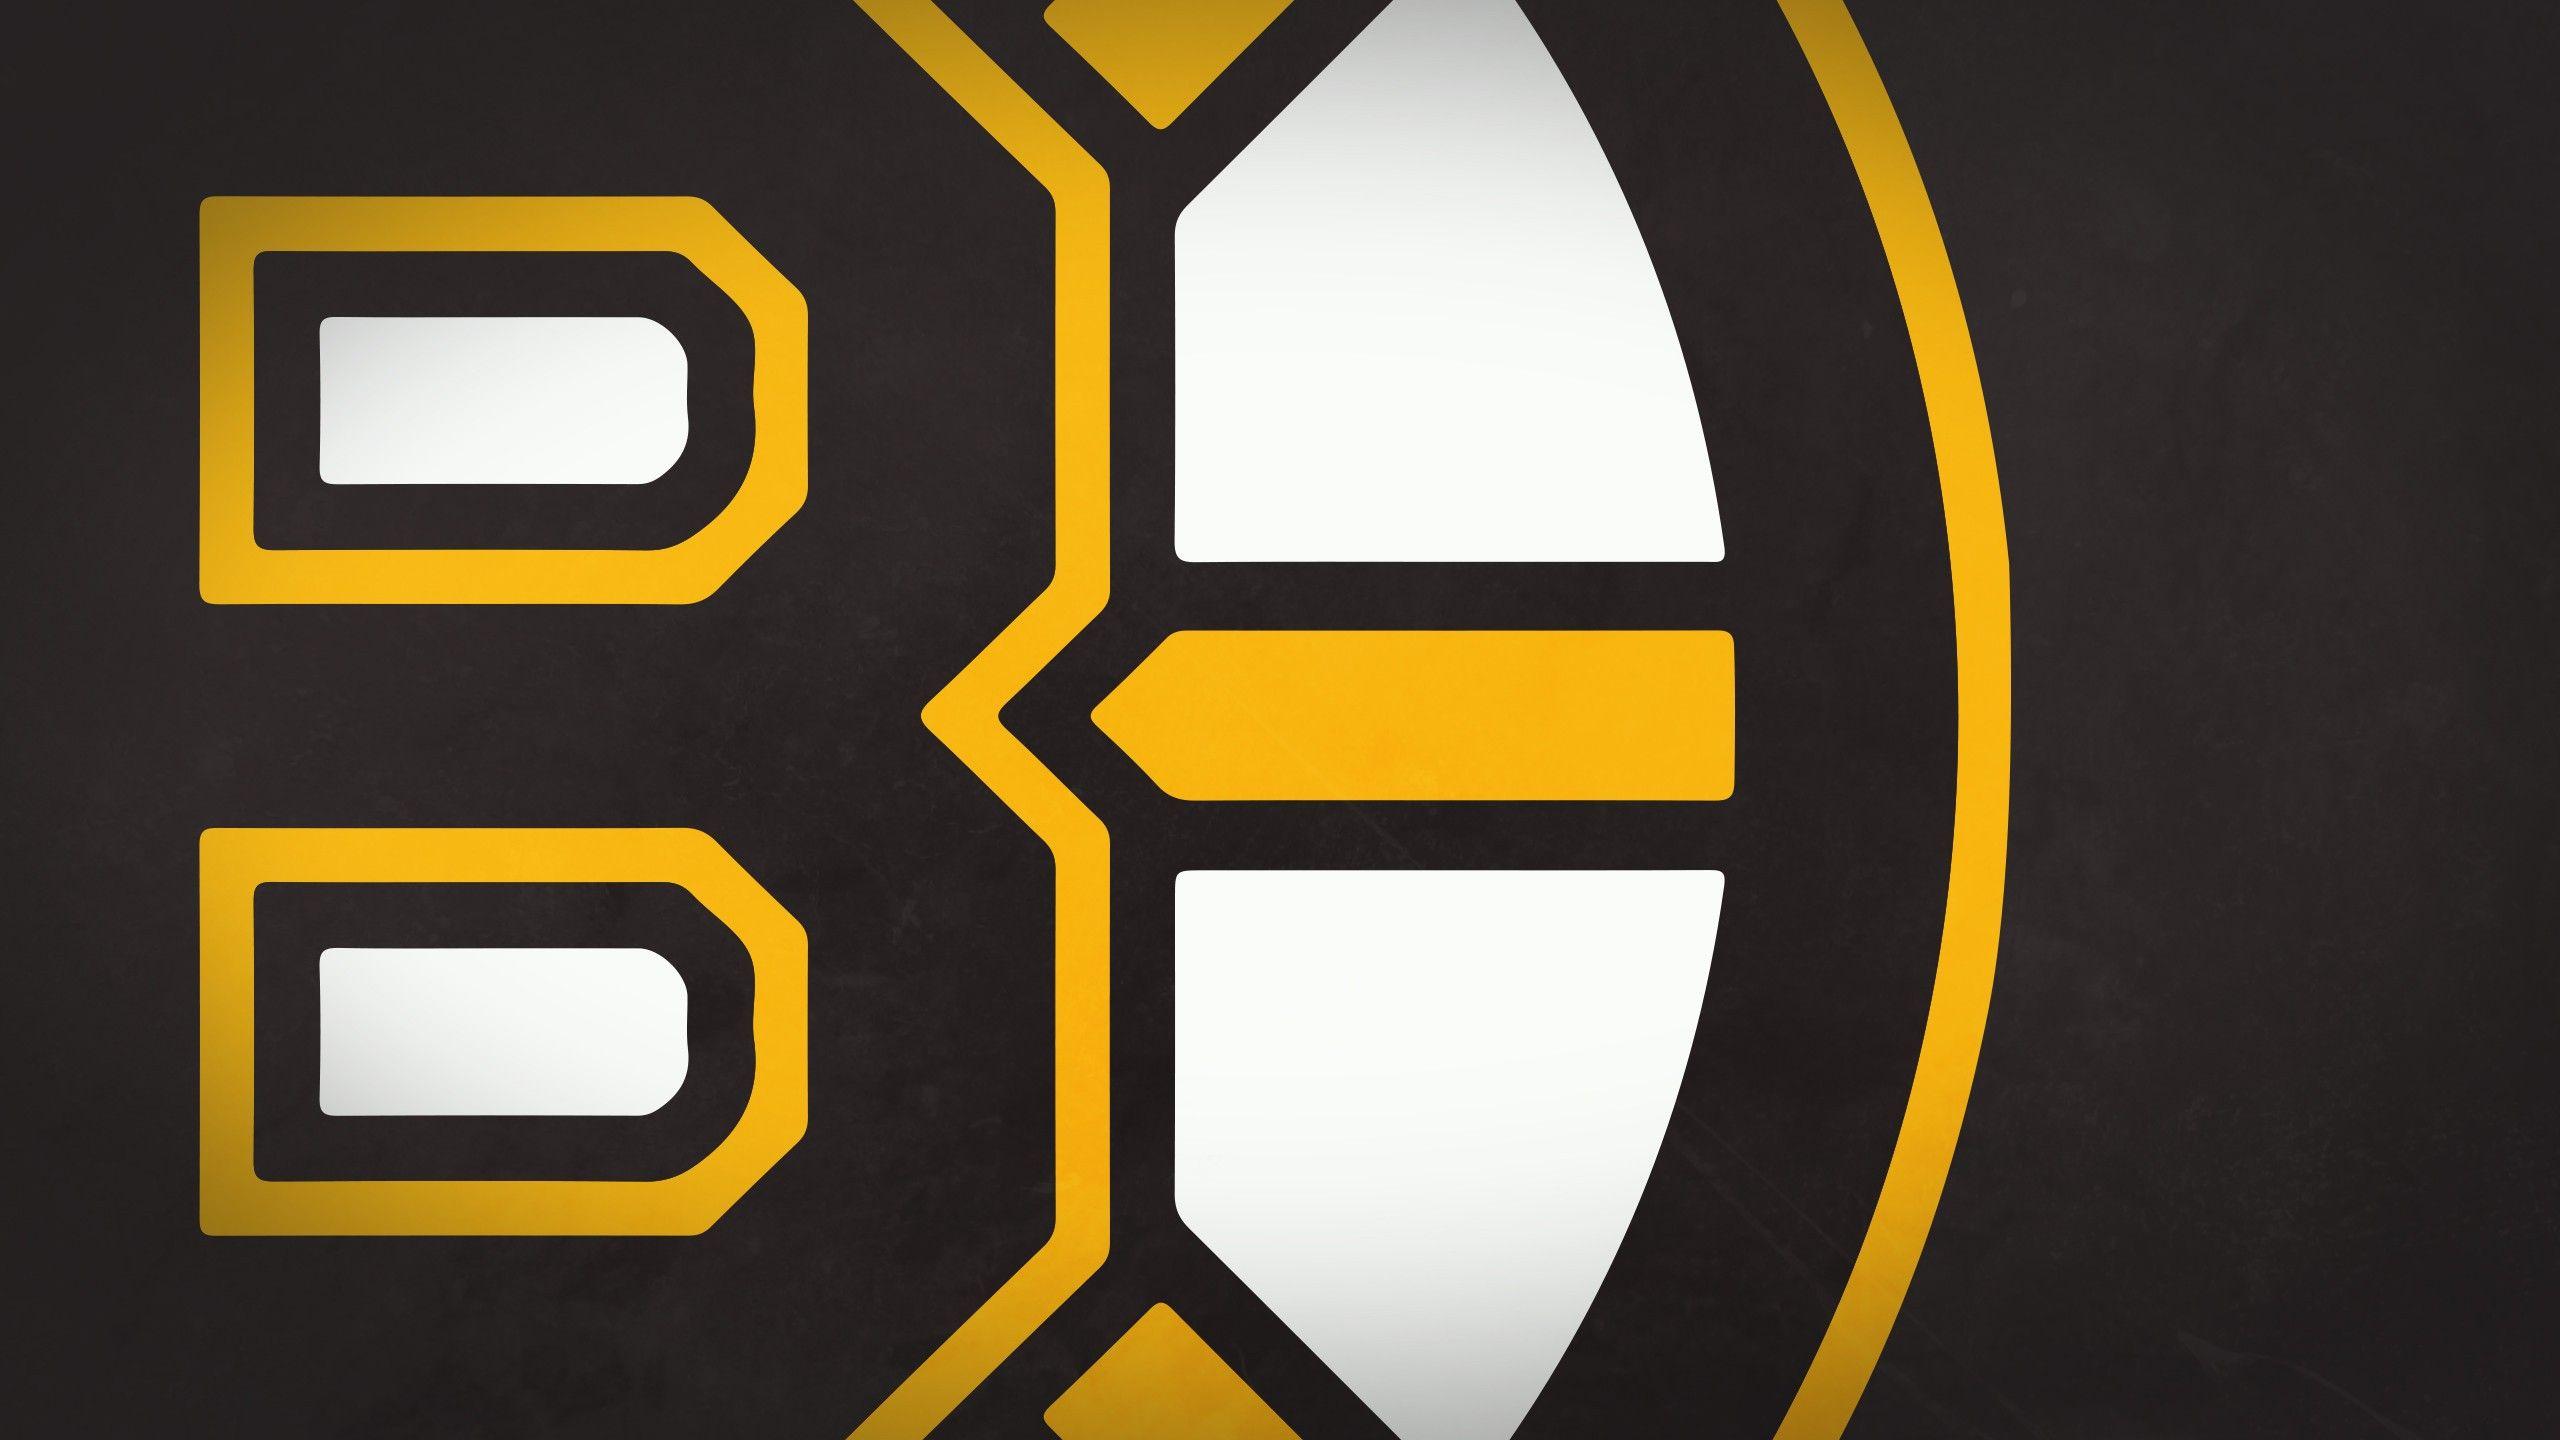 Boston Bruins Full HD Wallpapers and Backgrounds Image.